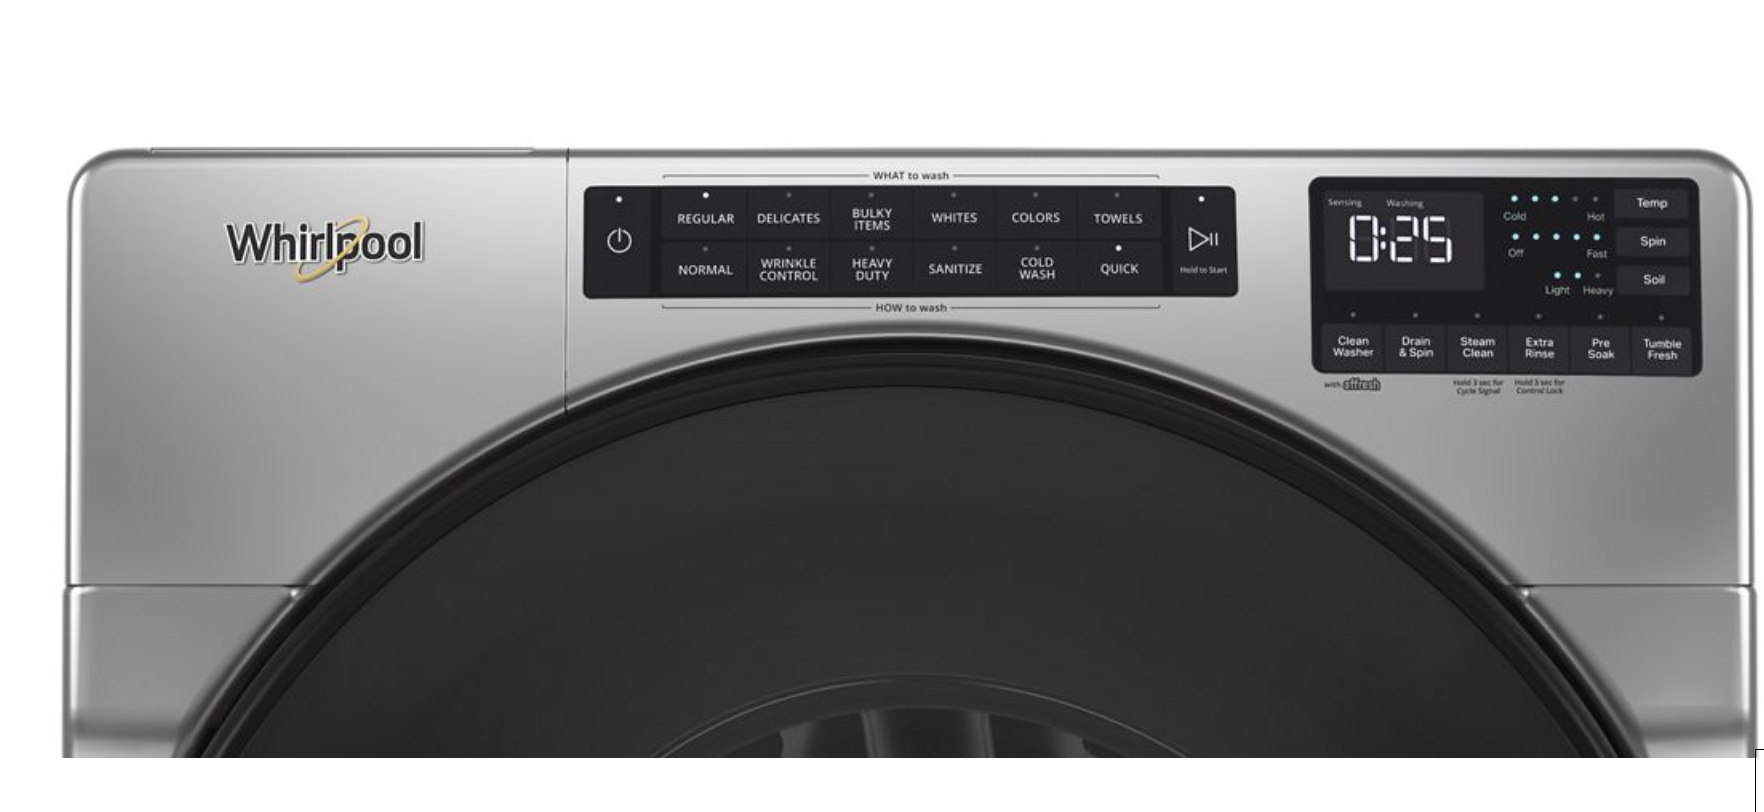 27" Whirlpool 5.2 Cu. Ft. Front Load Washer With Quick Wash Cycle - WFW5605MC